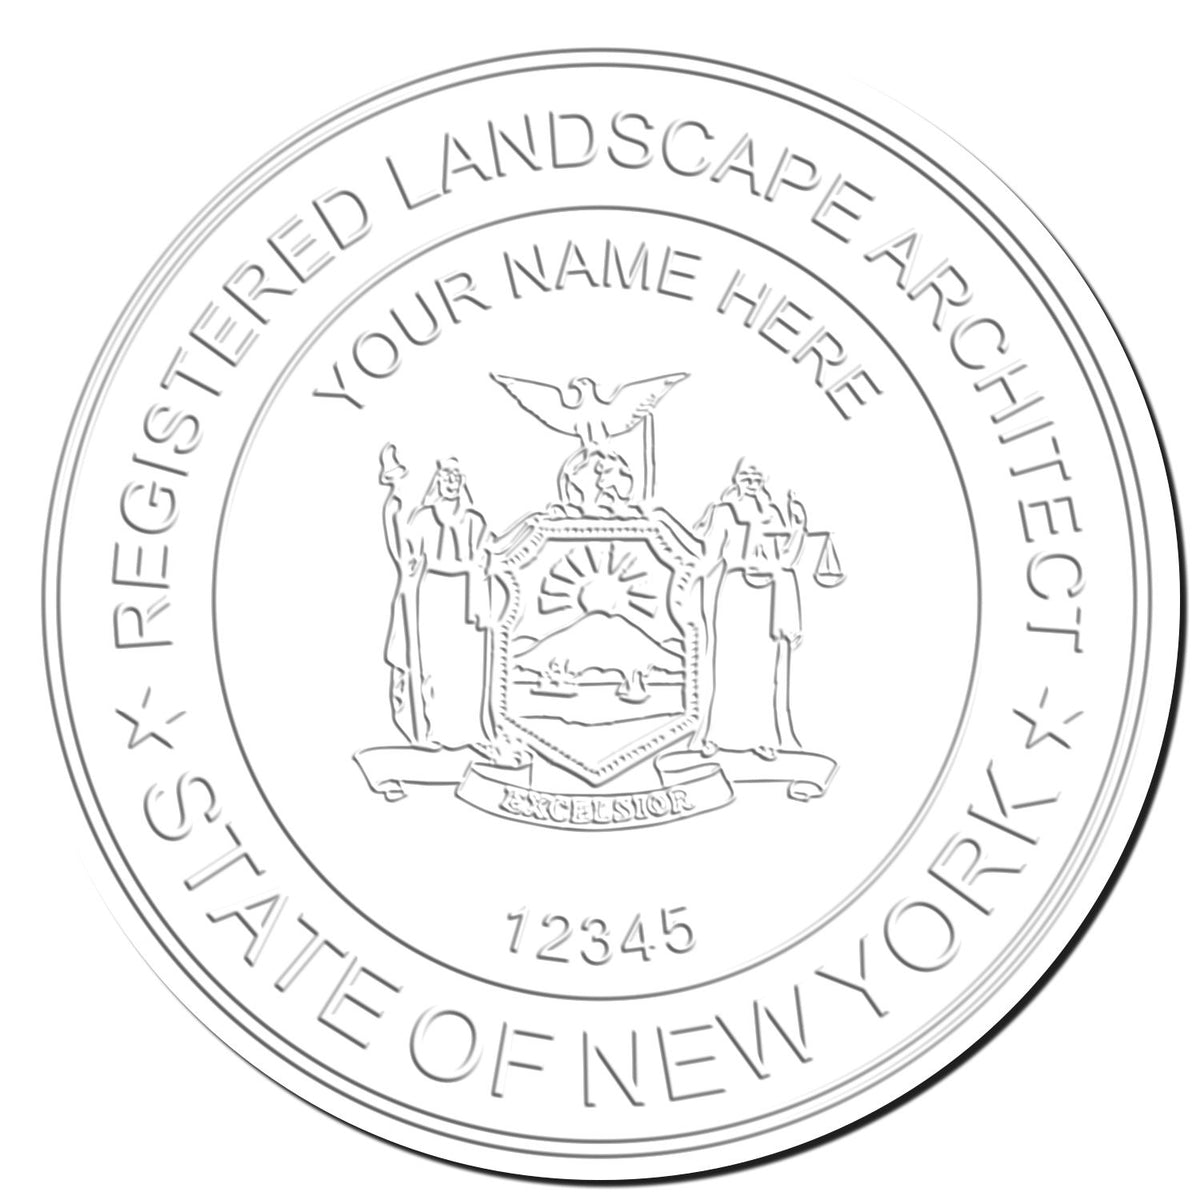 This paper is stamped with a sample imprint of the Hybrid New York Landscape Architect Seal, signifying its quality and reliability.